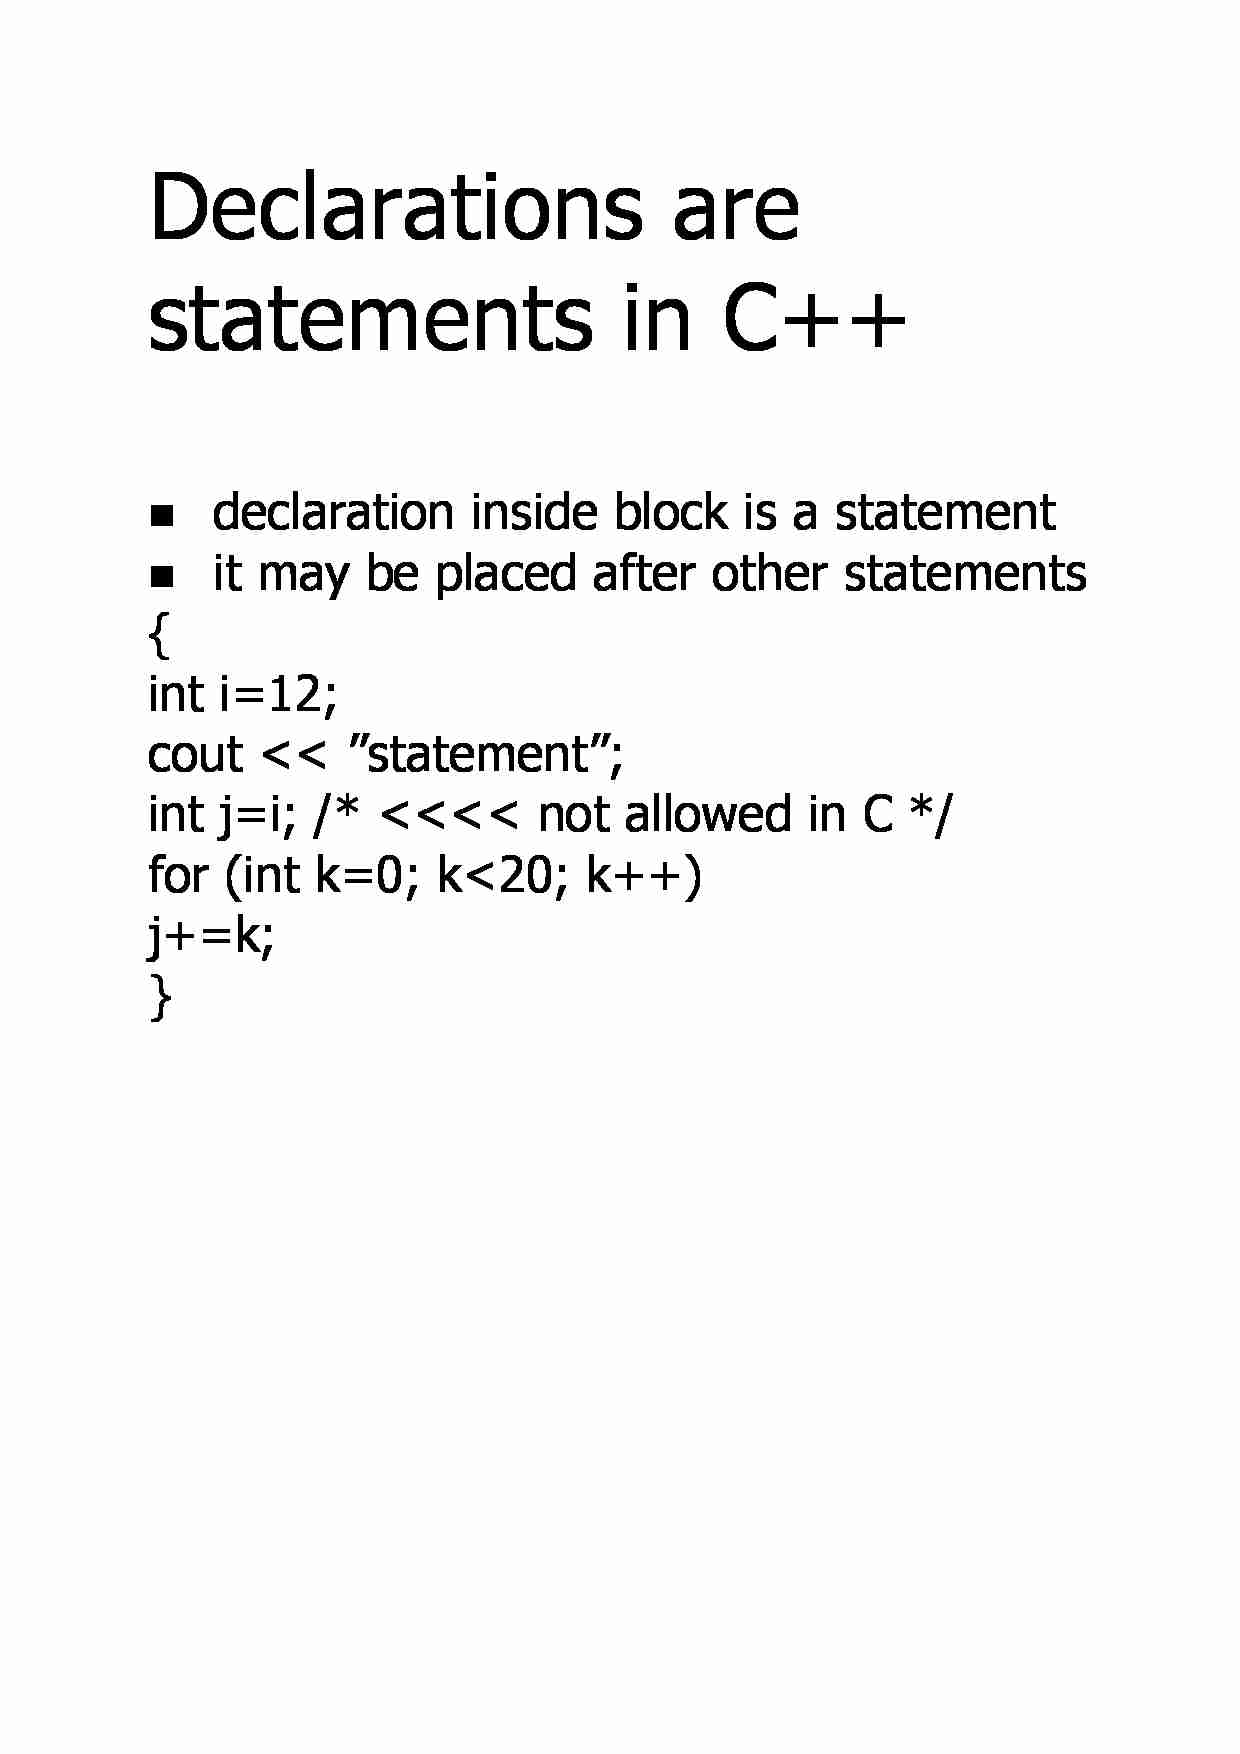 Declarations are statements in C++ - strona 1